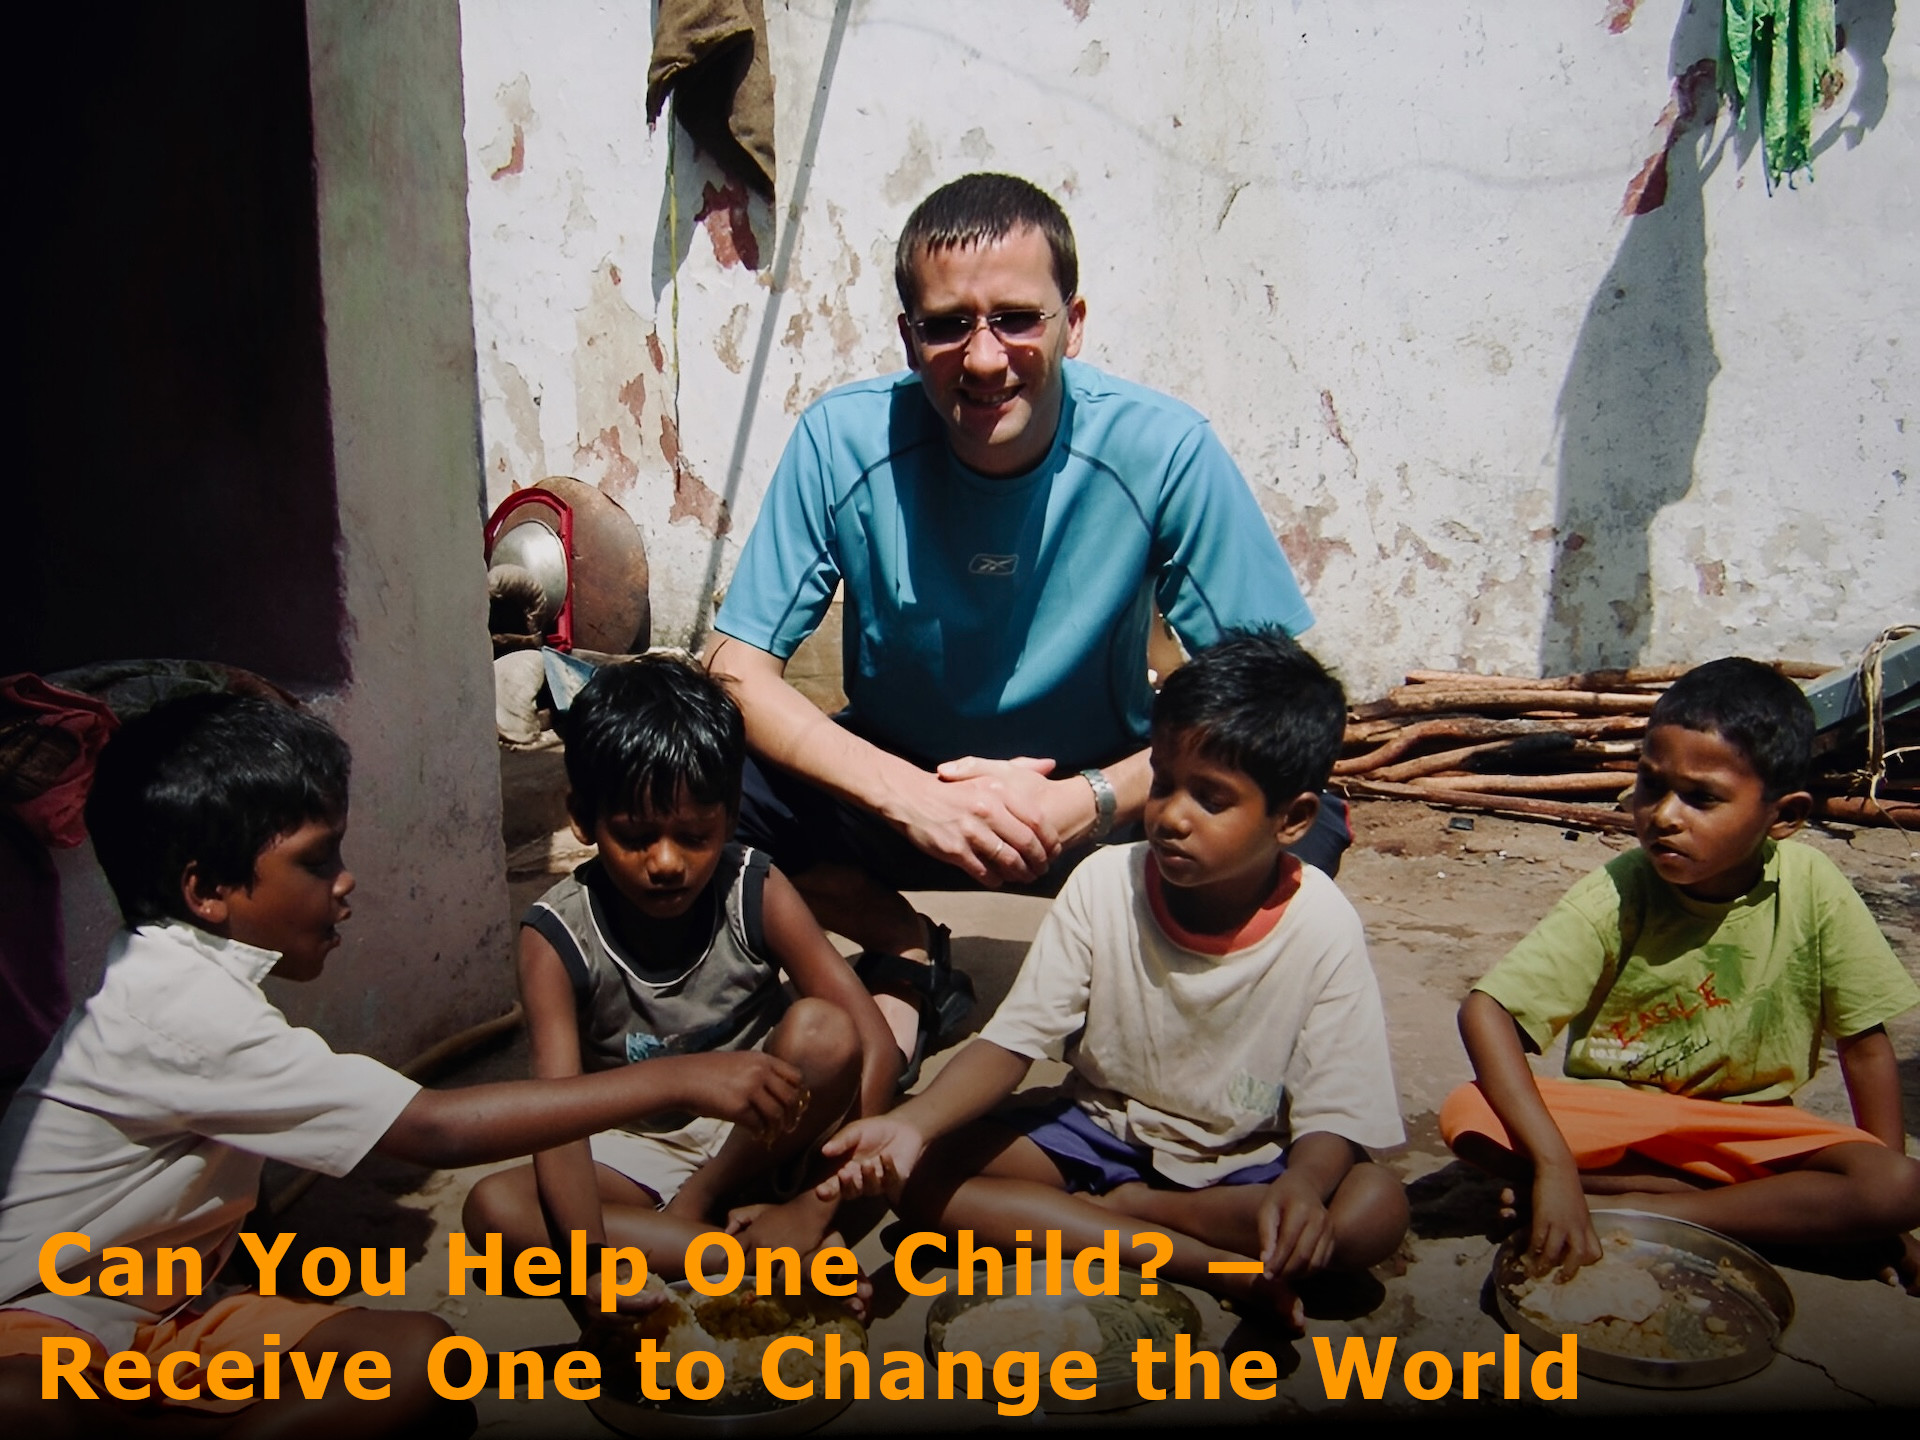 Can You Help One Child? – Receive One to Change the World